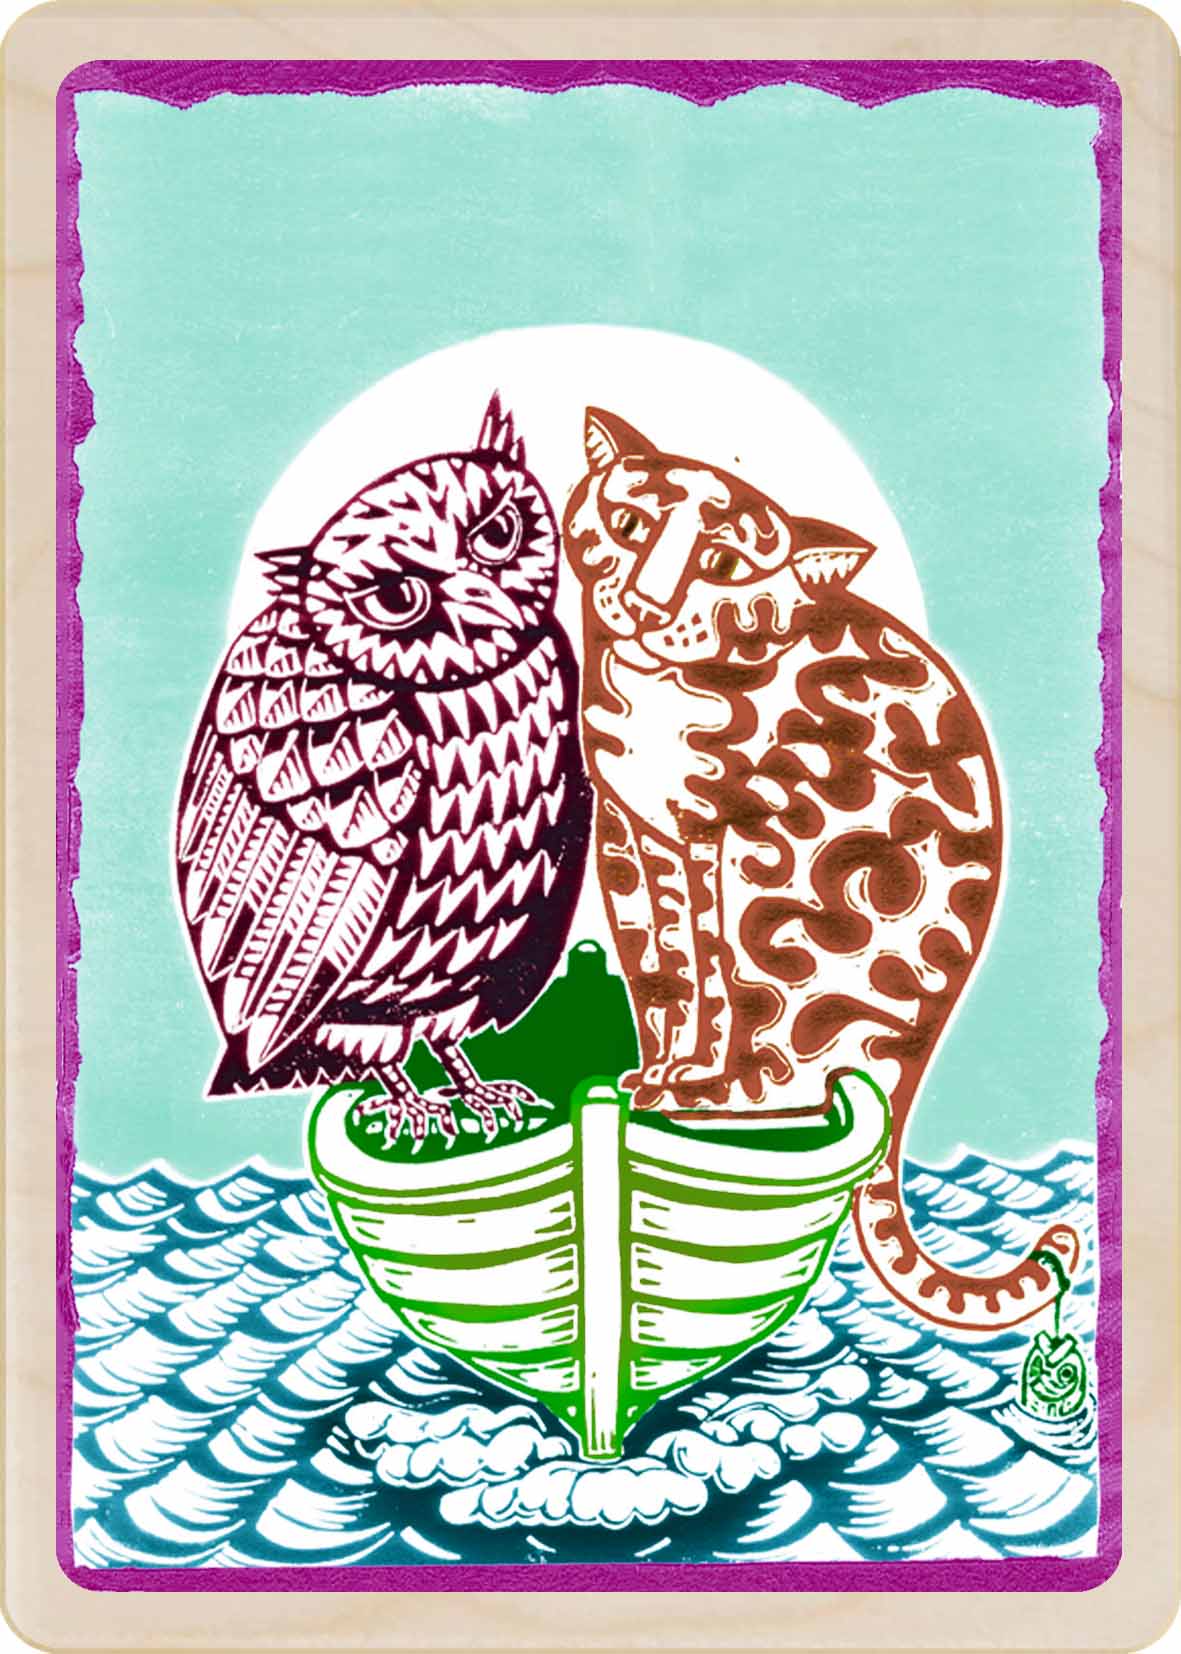 OWL AND PUSSYCAT